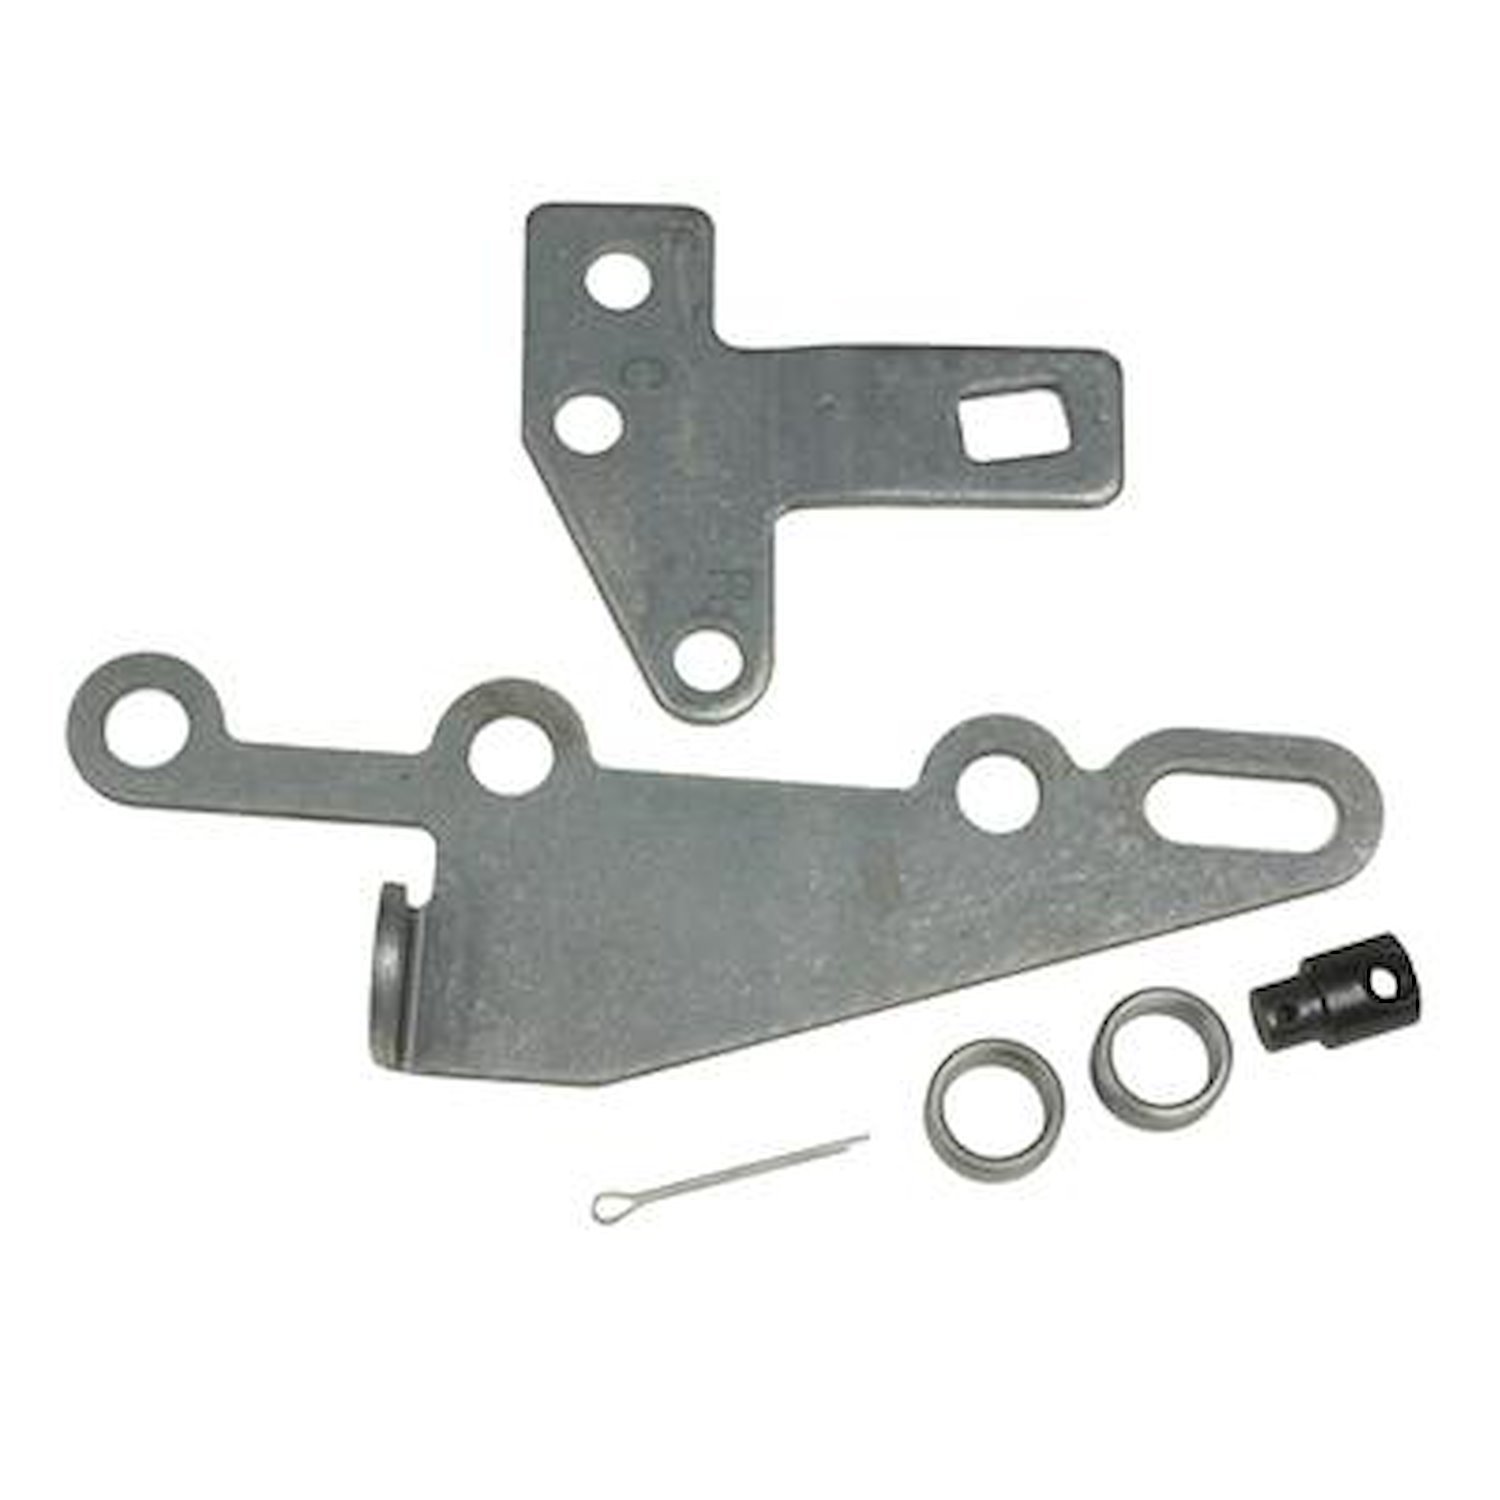 Automatic Shifter Bracket and Lever Kit GM TH400, TH350, TH250, TH200, 2004R, 700R4